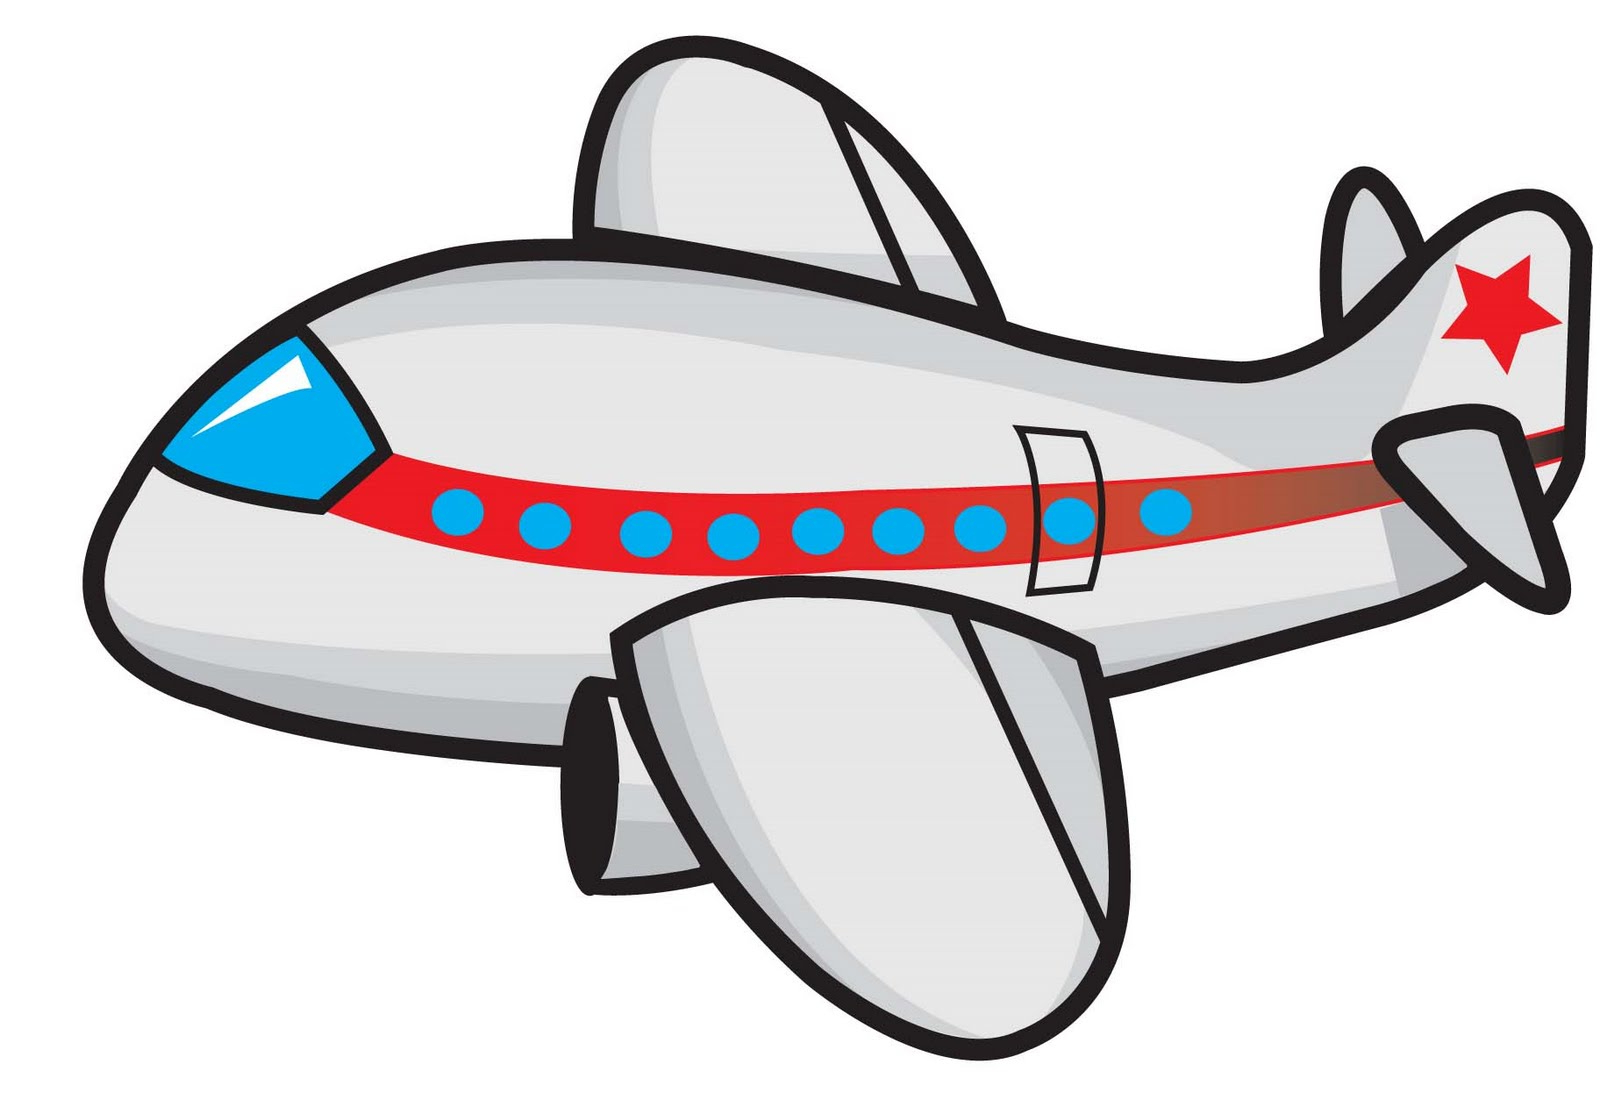 Cartoon Airplane Image | Free download on ClipArtMag